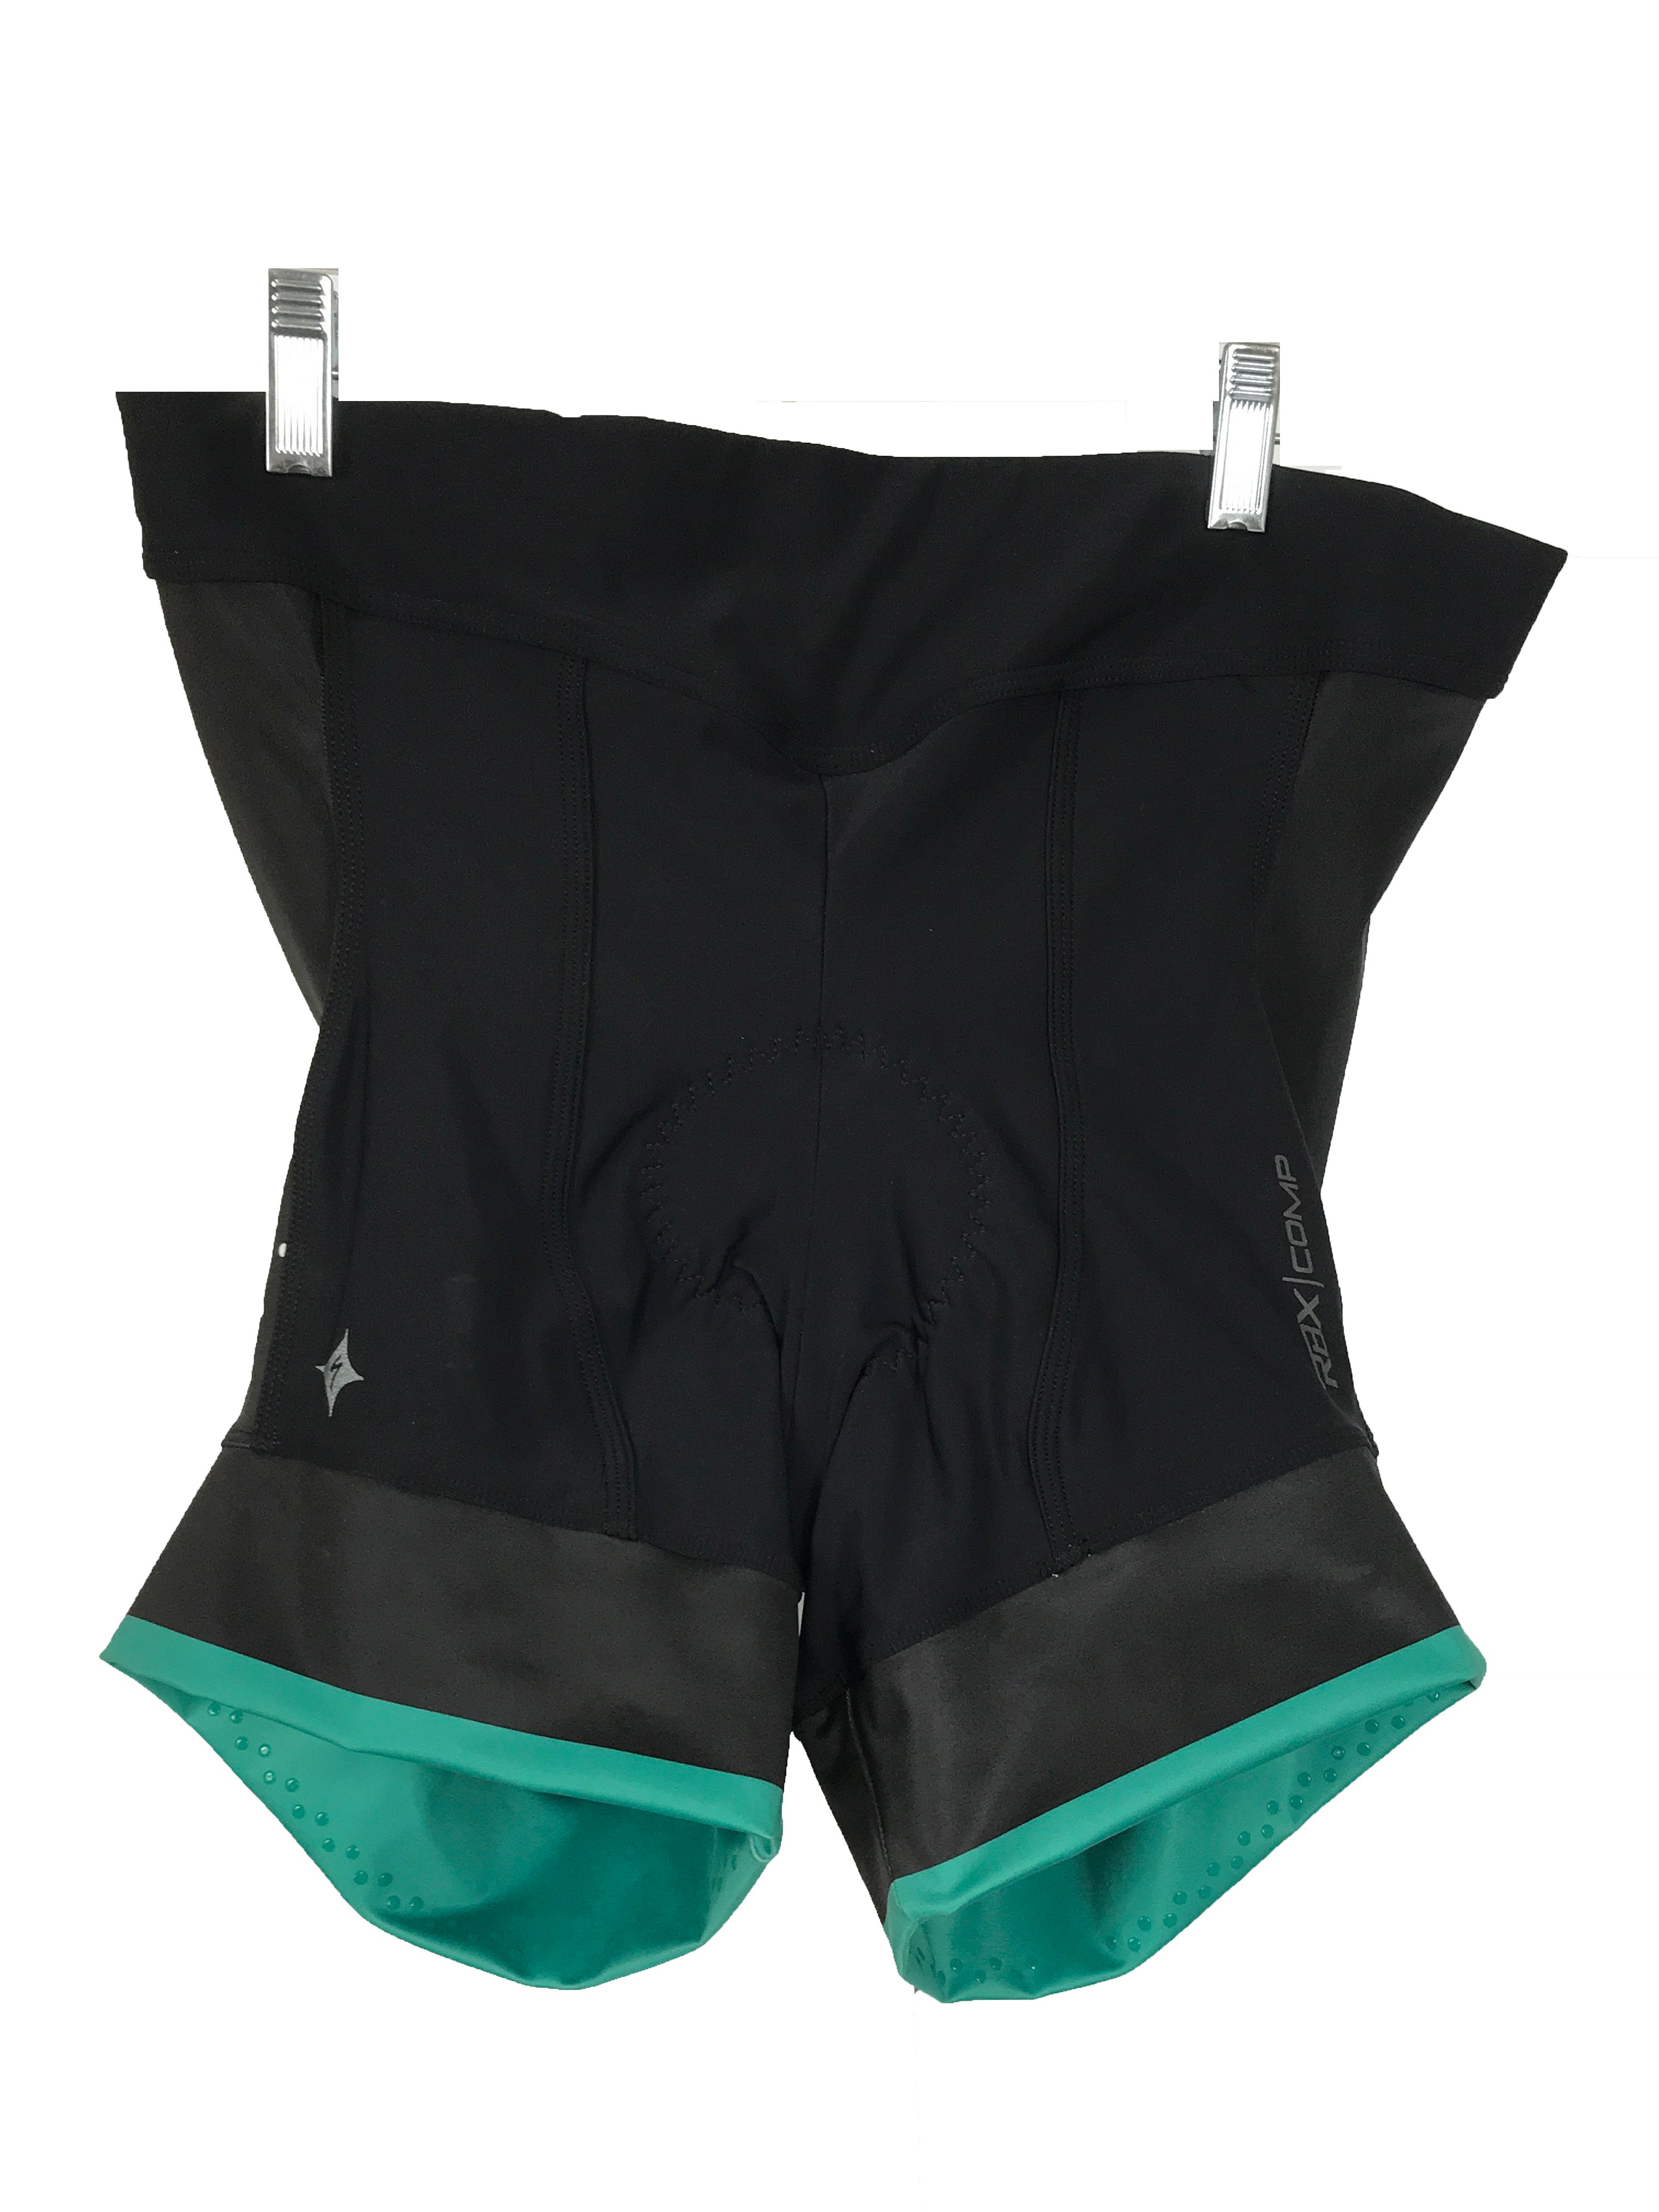 Specialized RBX Comp Shorty Black and Green Shorts with Chamois Women's Size XL NWT